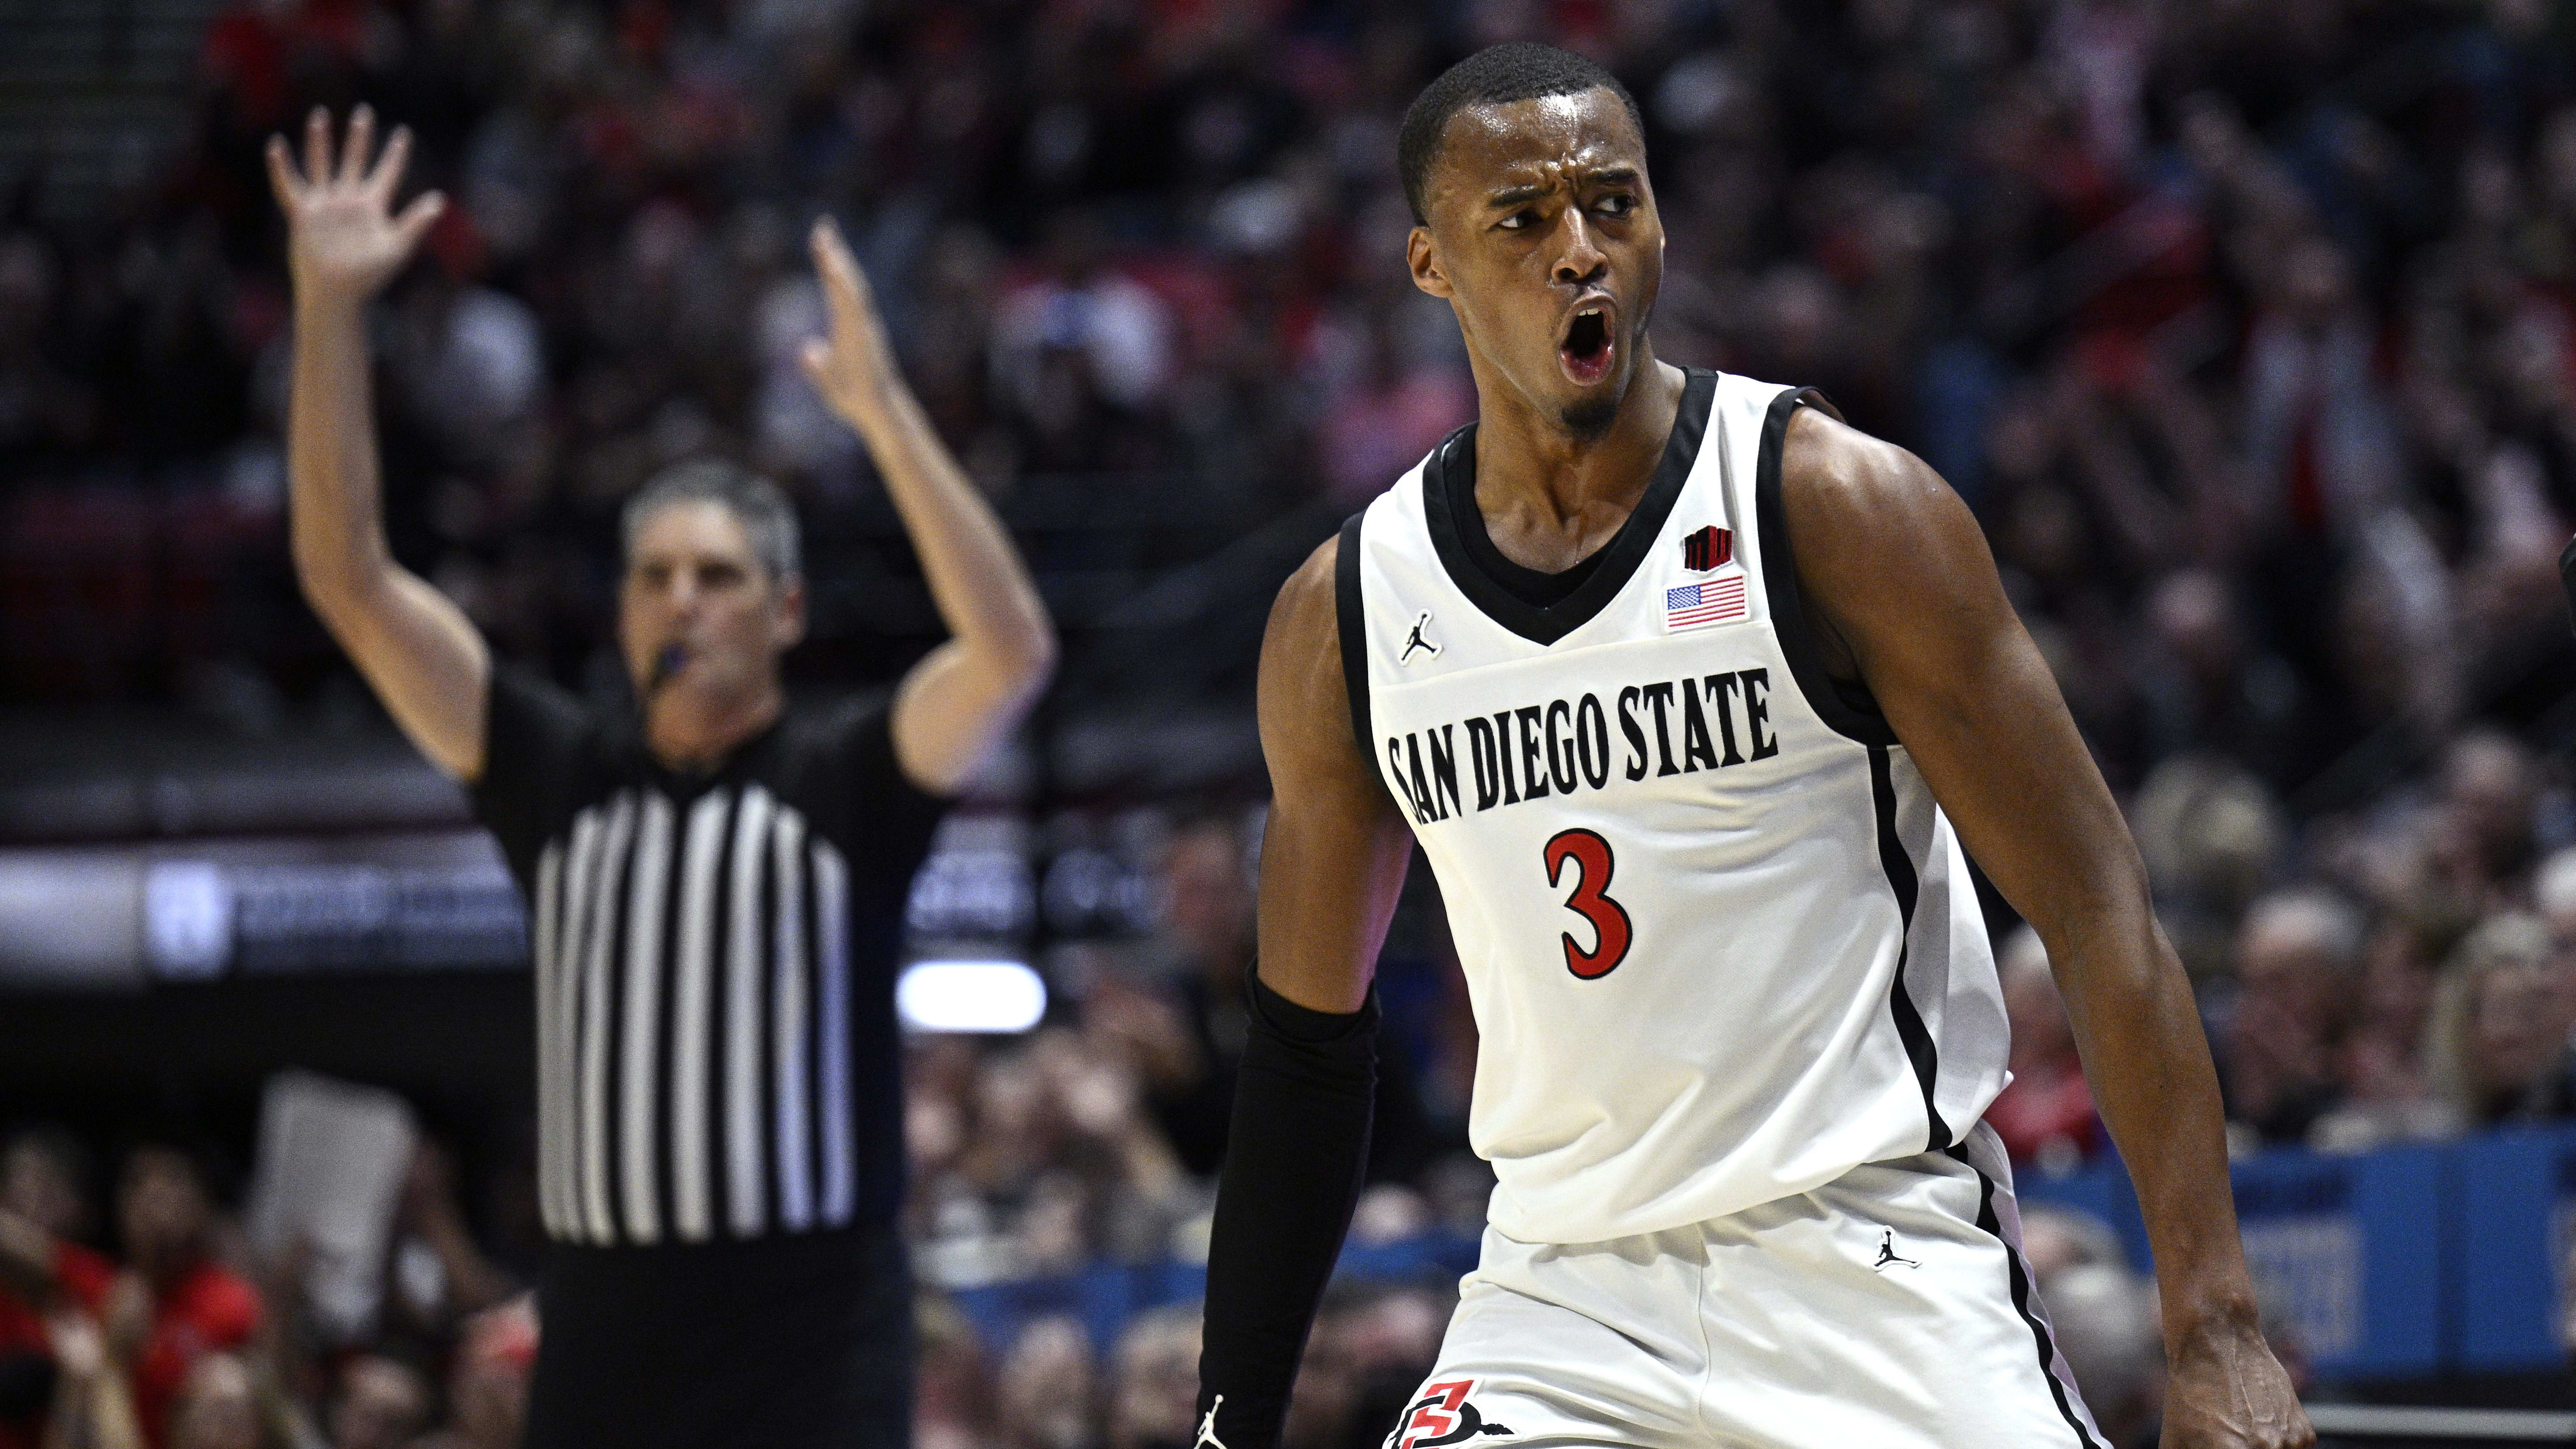 Ohio State Buckeyes Land Commitment From San Diego State Transfer Micah Parrish